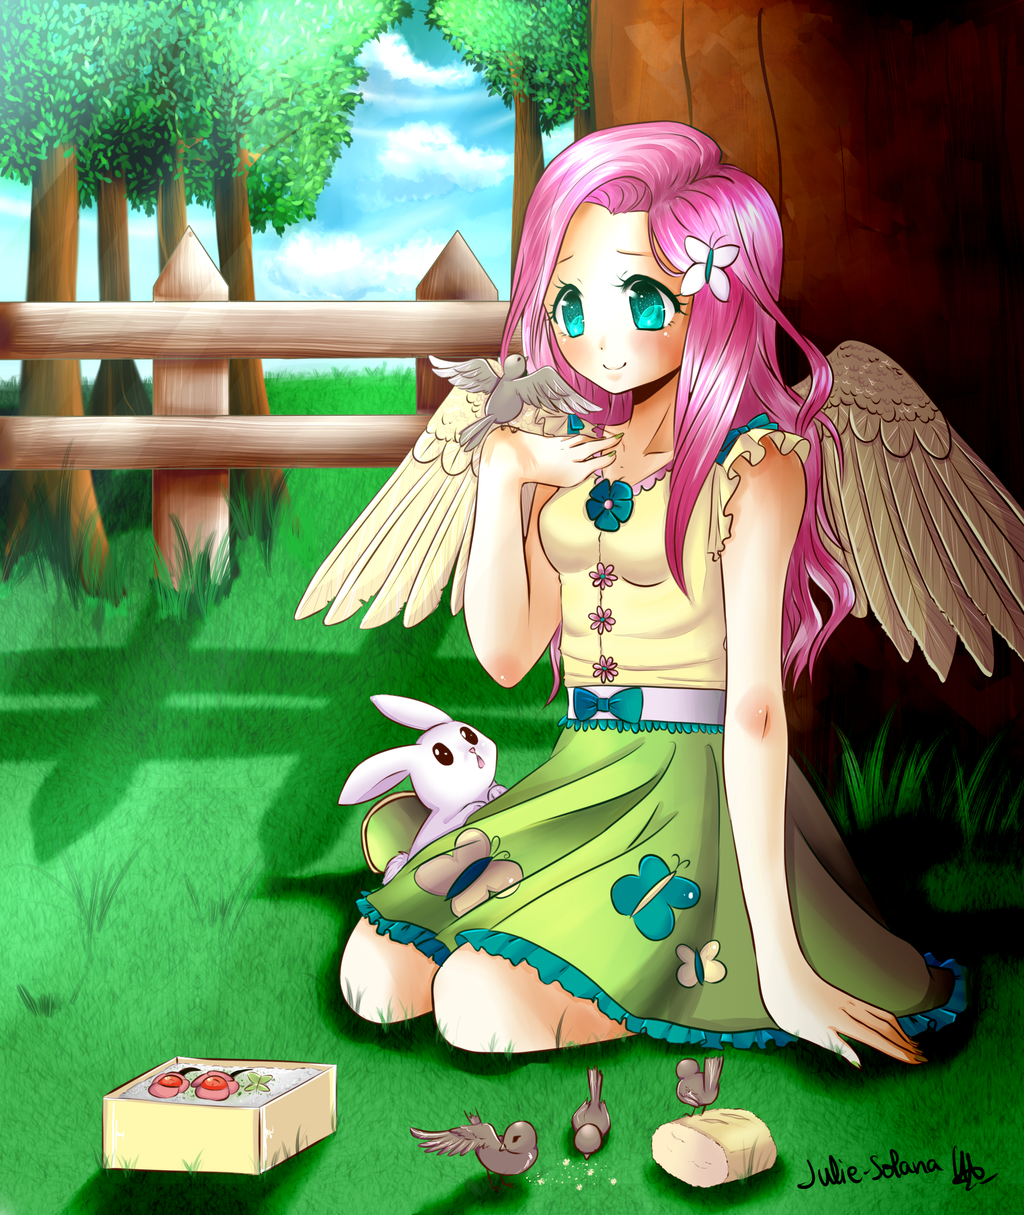 1415830__safe_artist-colon-solanapple_angel+bunny_fluttershy_anime_bird_bread_clothes_cute_fence_food_grass+field_human_humanized_on+knees_scenery_skir.png